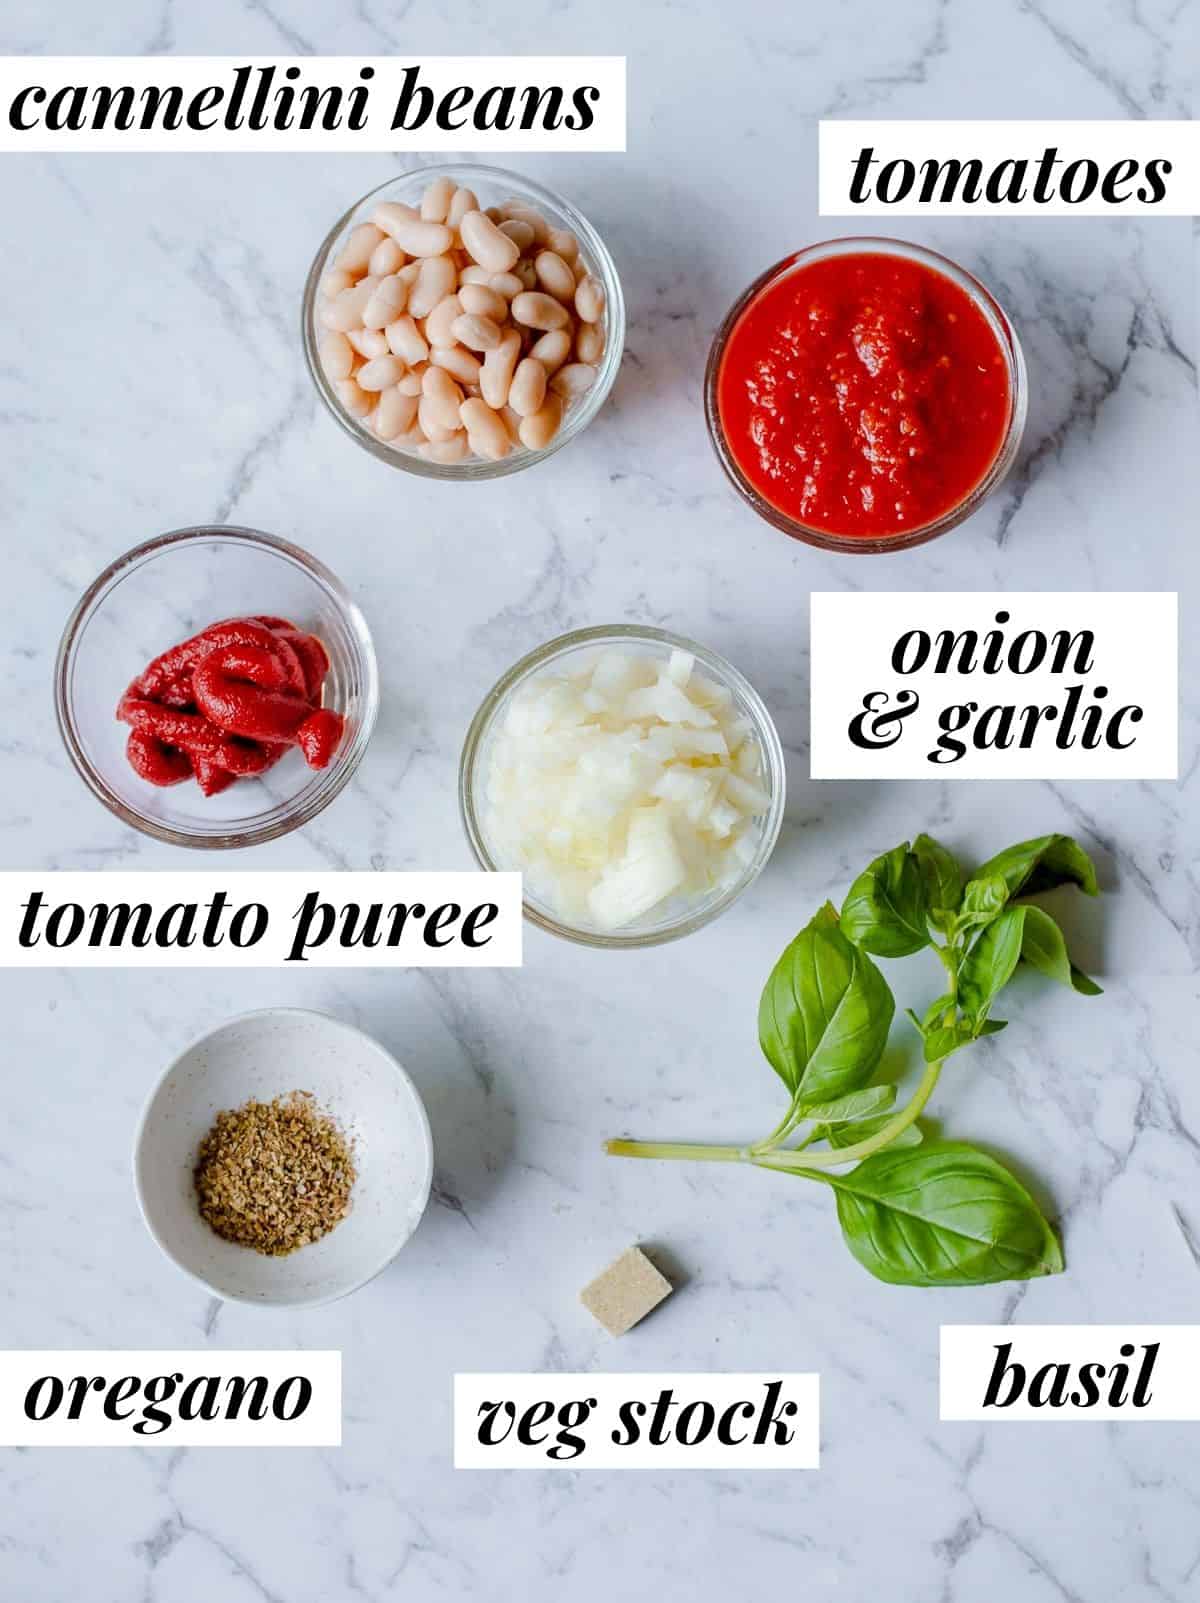 Ingredients to make a creamy white bean and tomato soup.